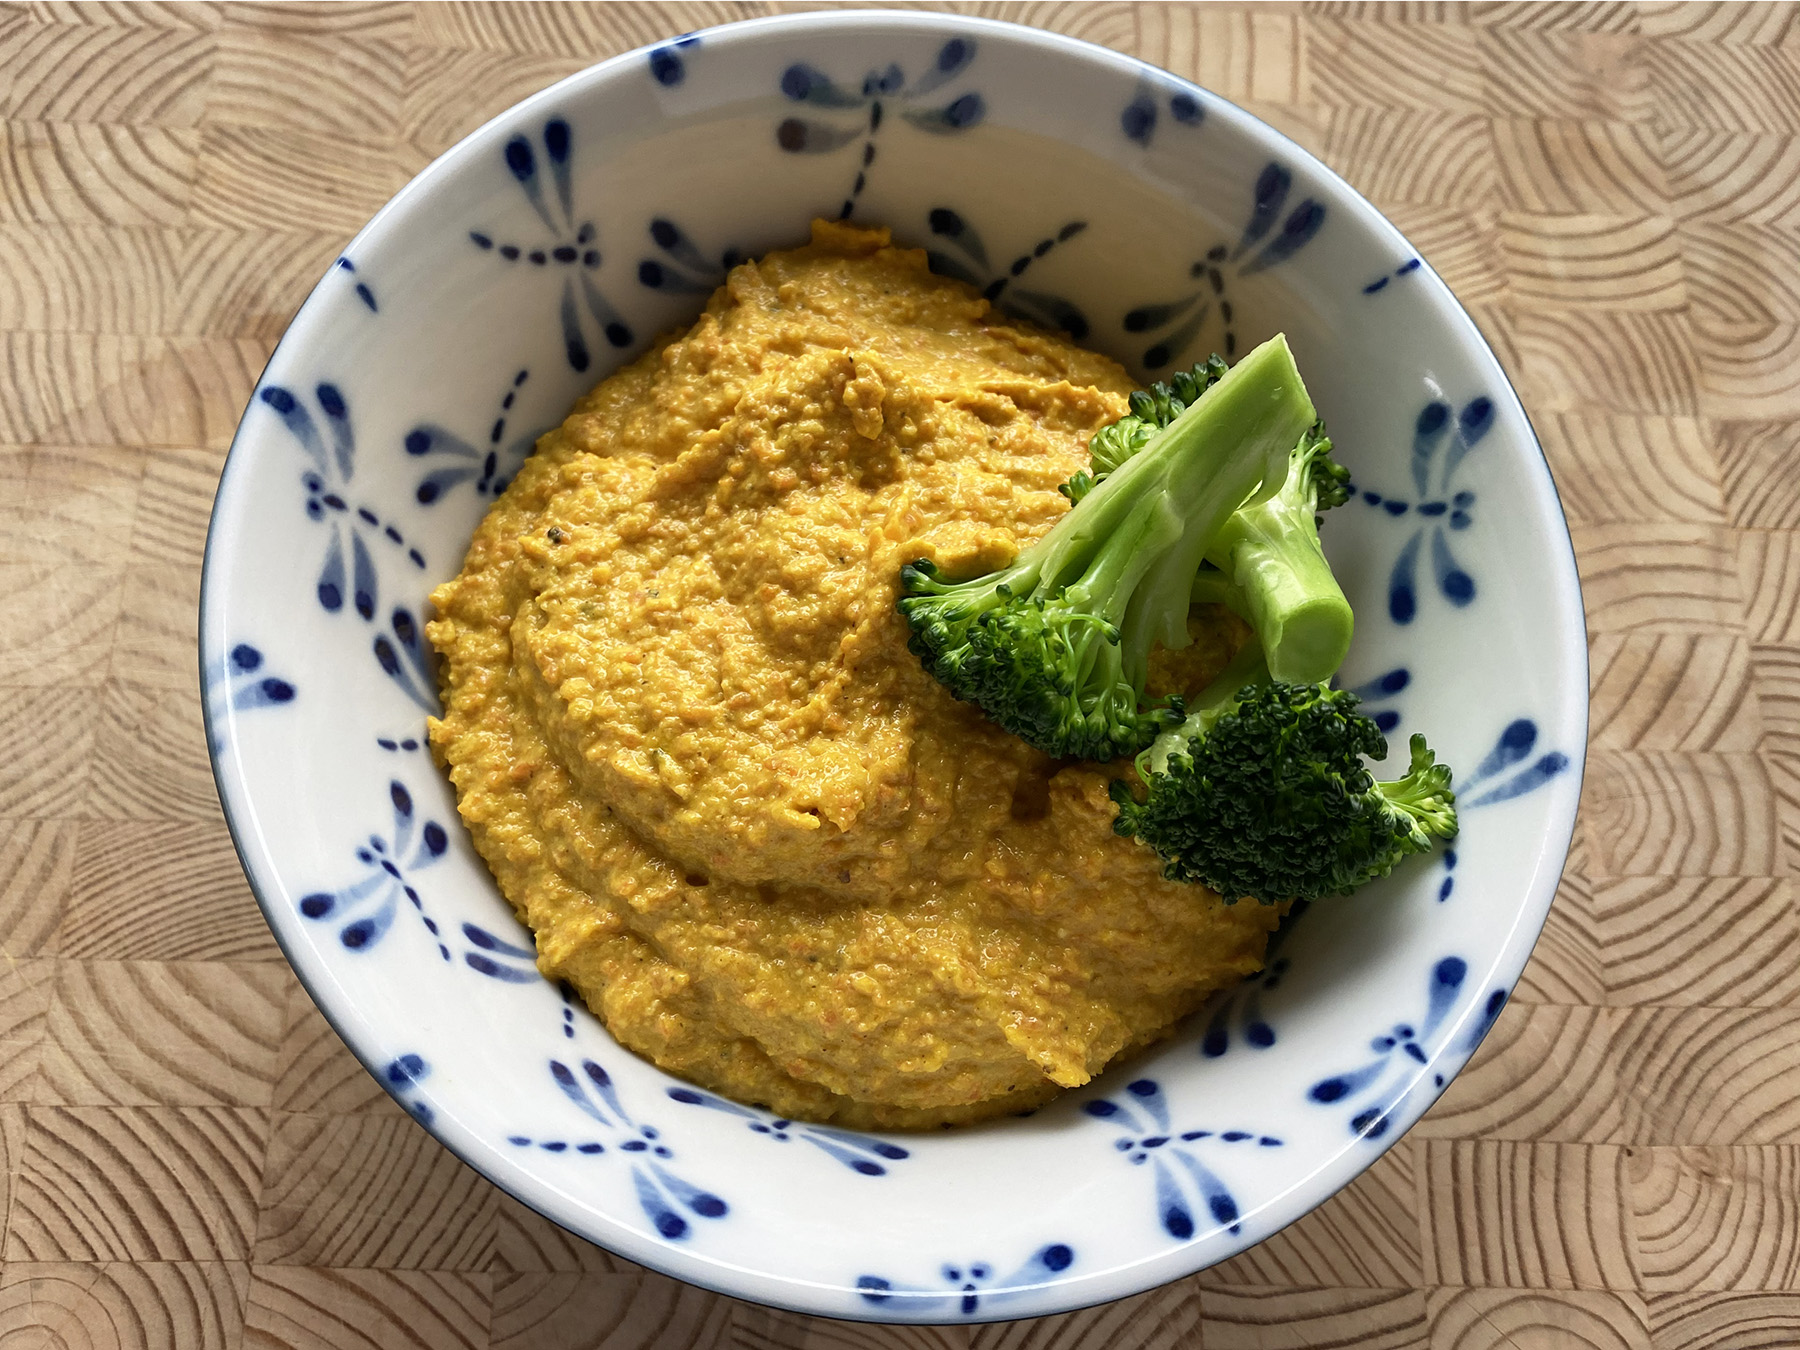 Carrot and Cashew Dip